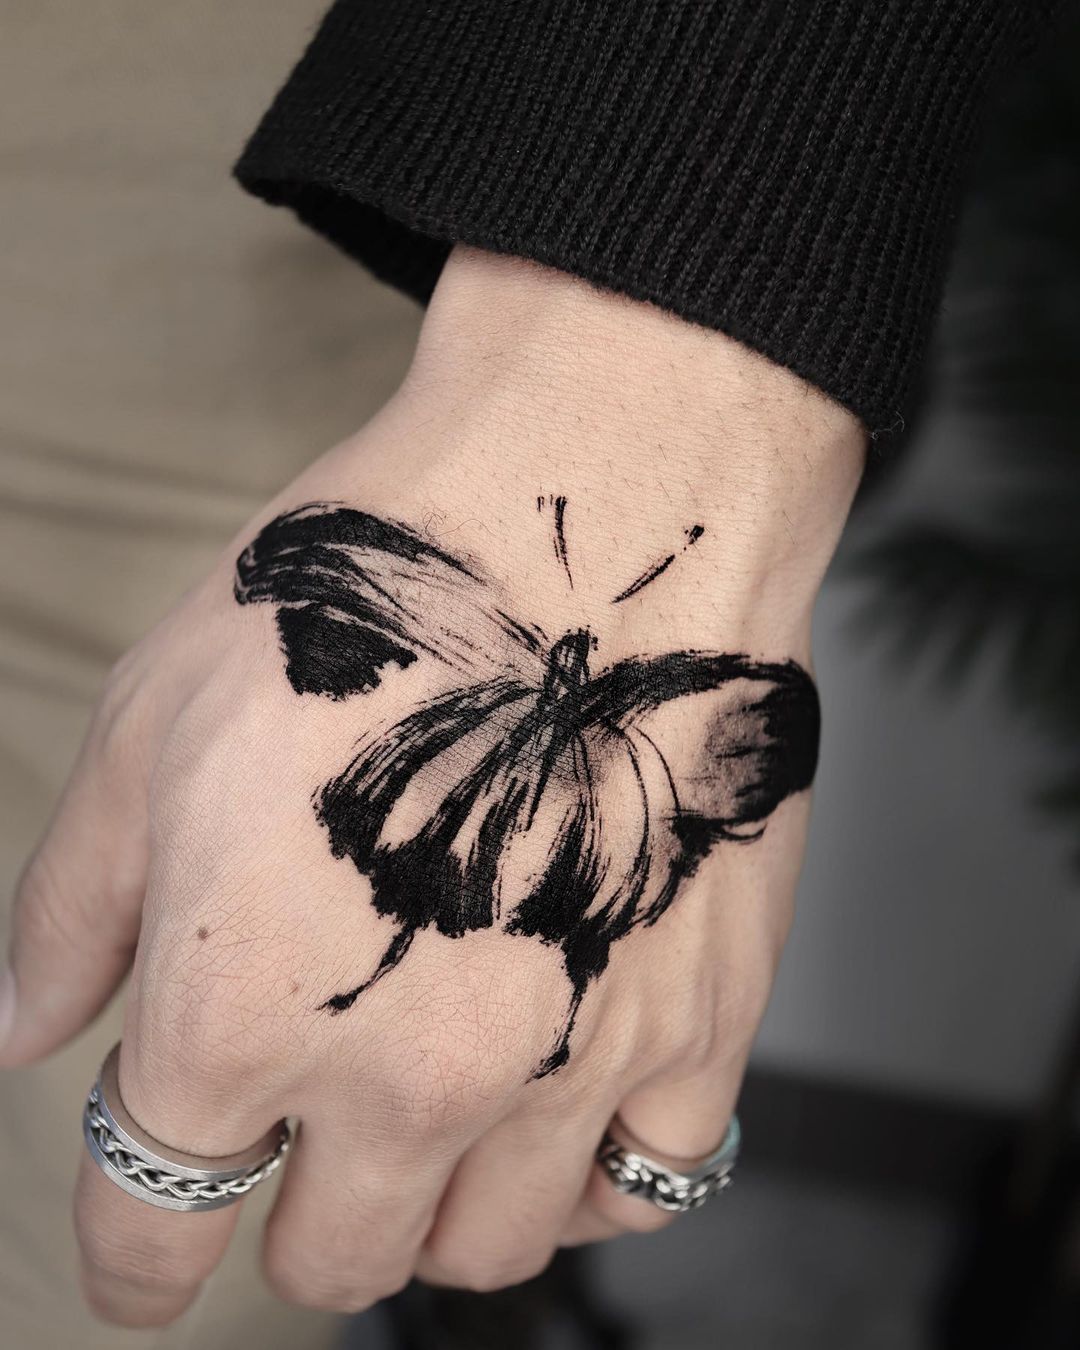 Black Butterfly Tattoo on Hand